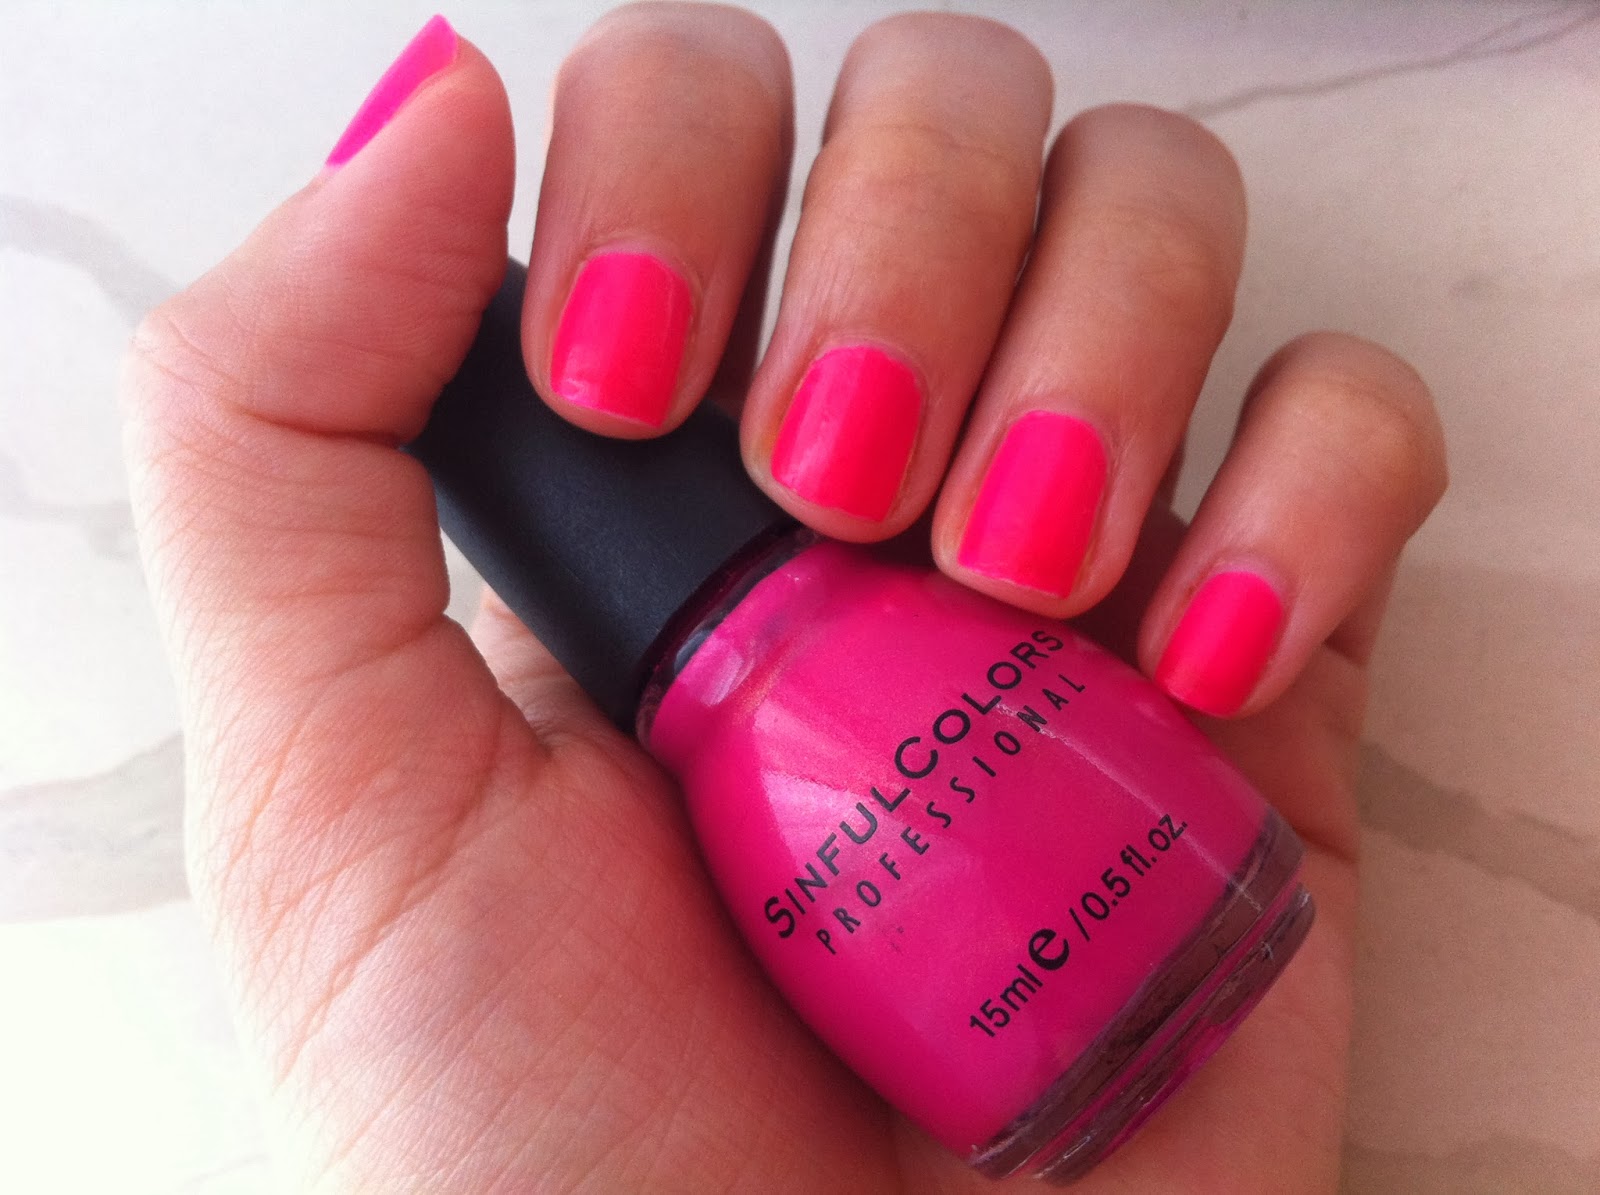 9. Sinful Colors Nail Polish Glitter in Pink Forever - wide 6